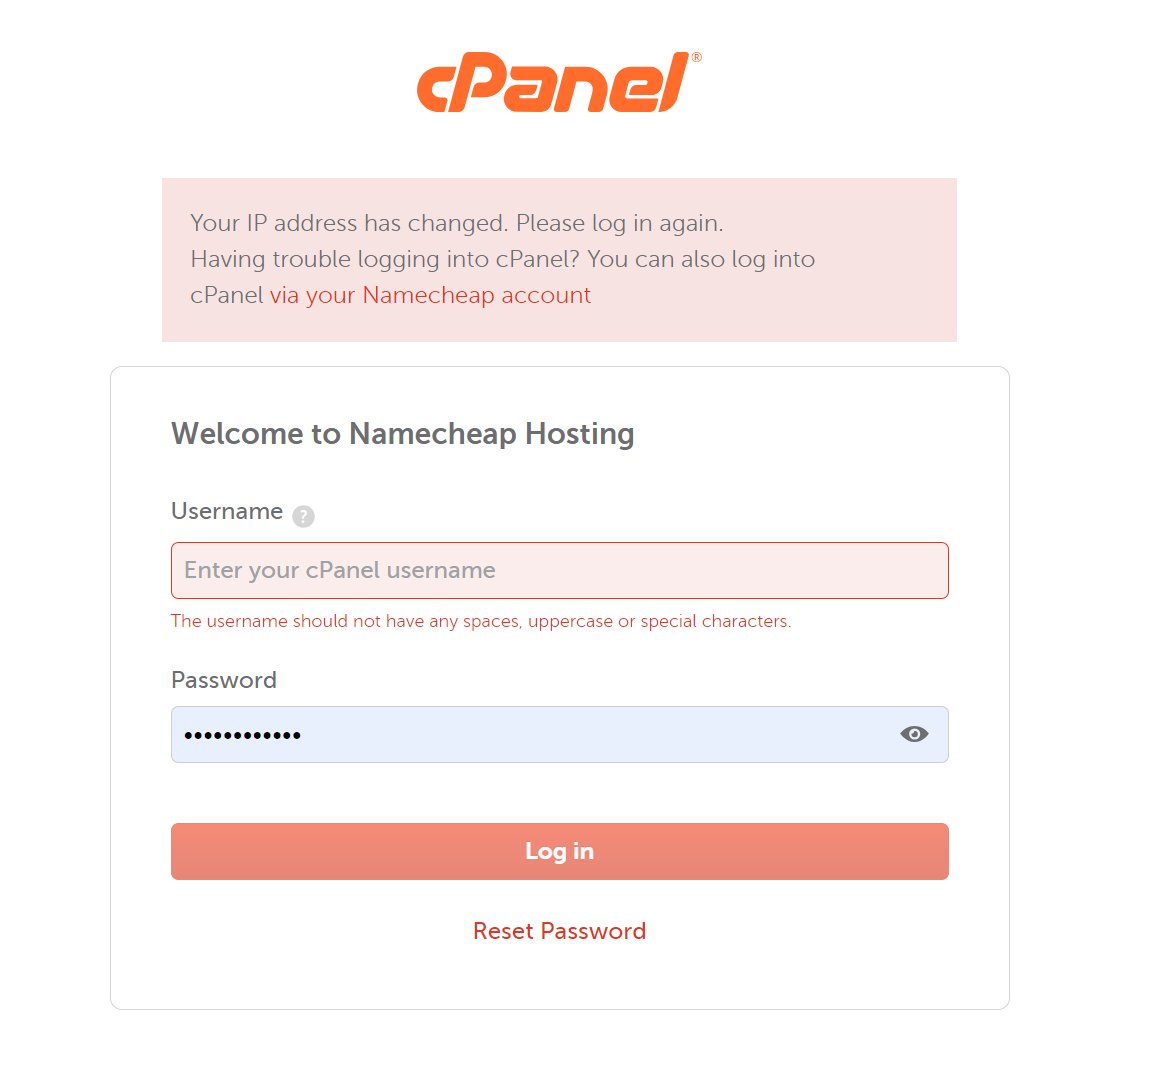 Is there a way to fix this error that keeps popping up when trying to access cPanel?
#namecheap #cPanel